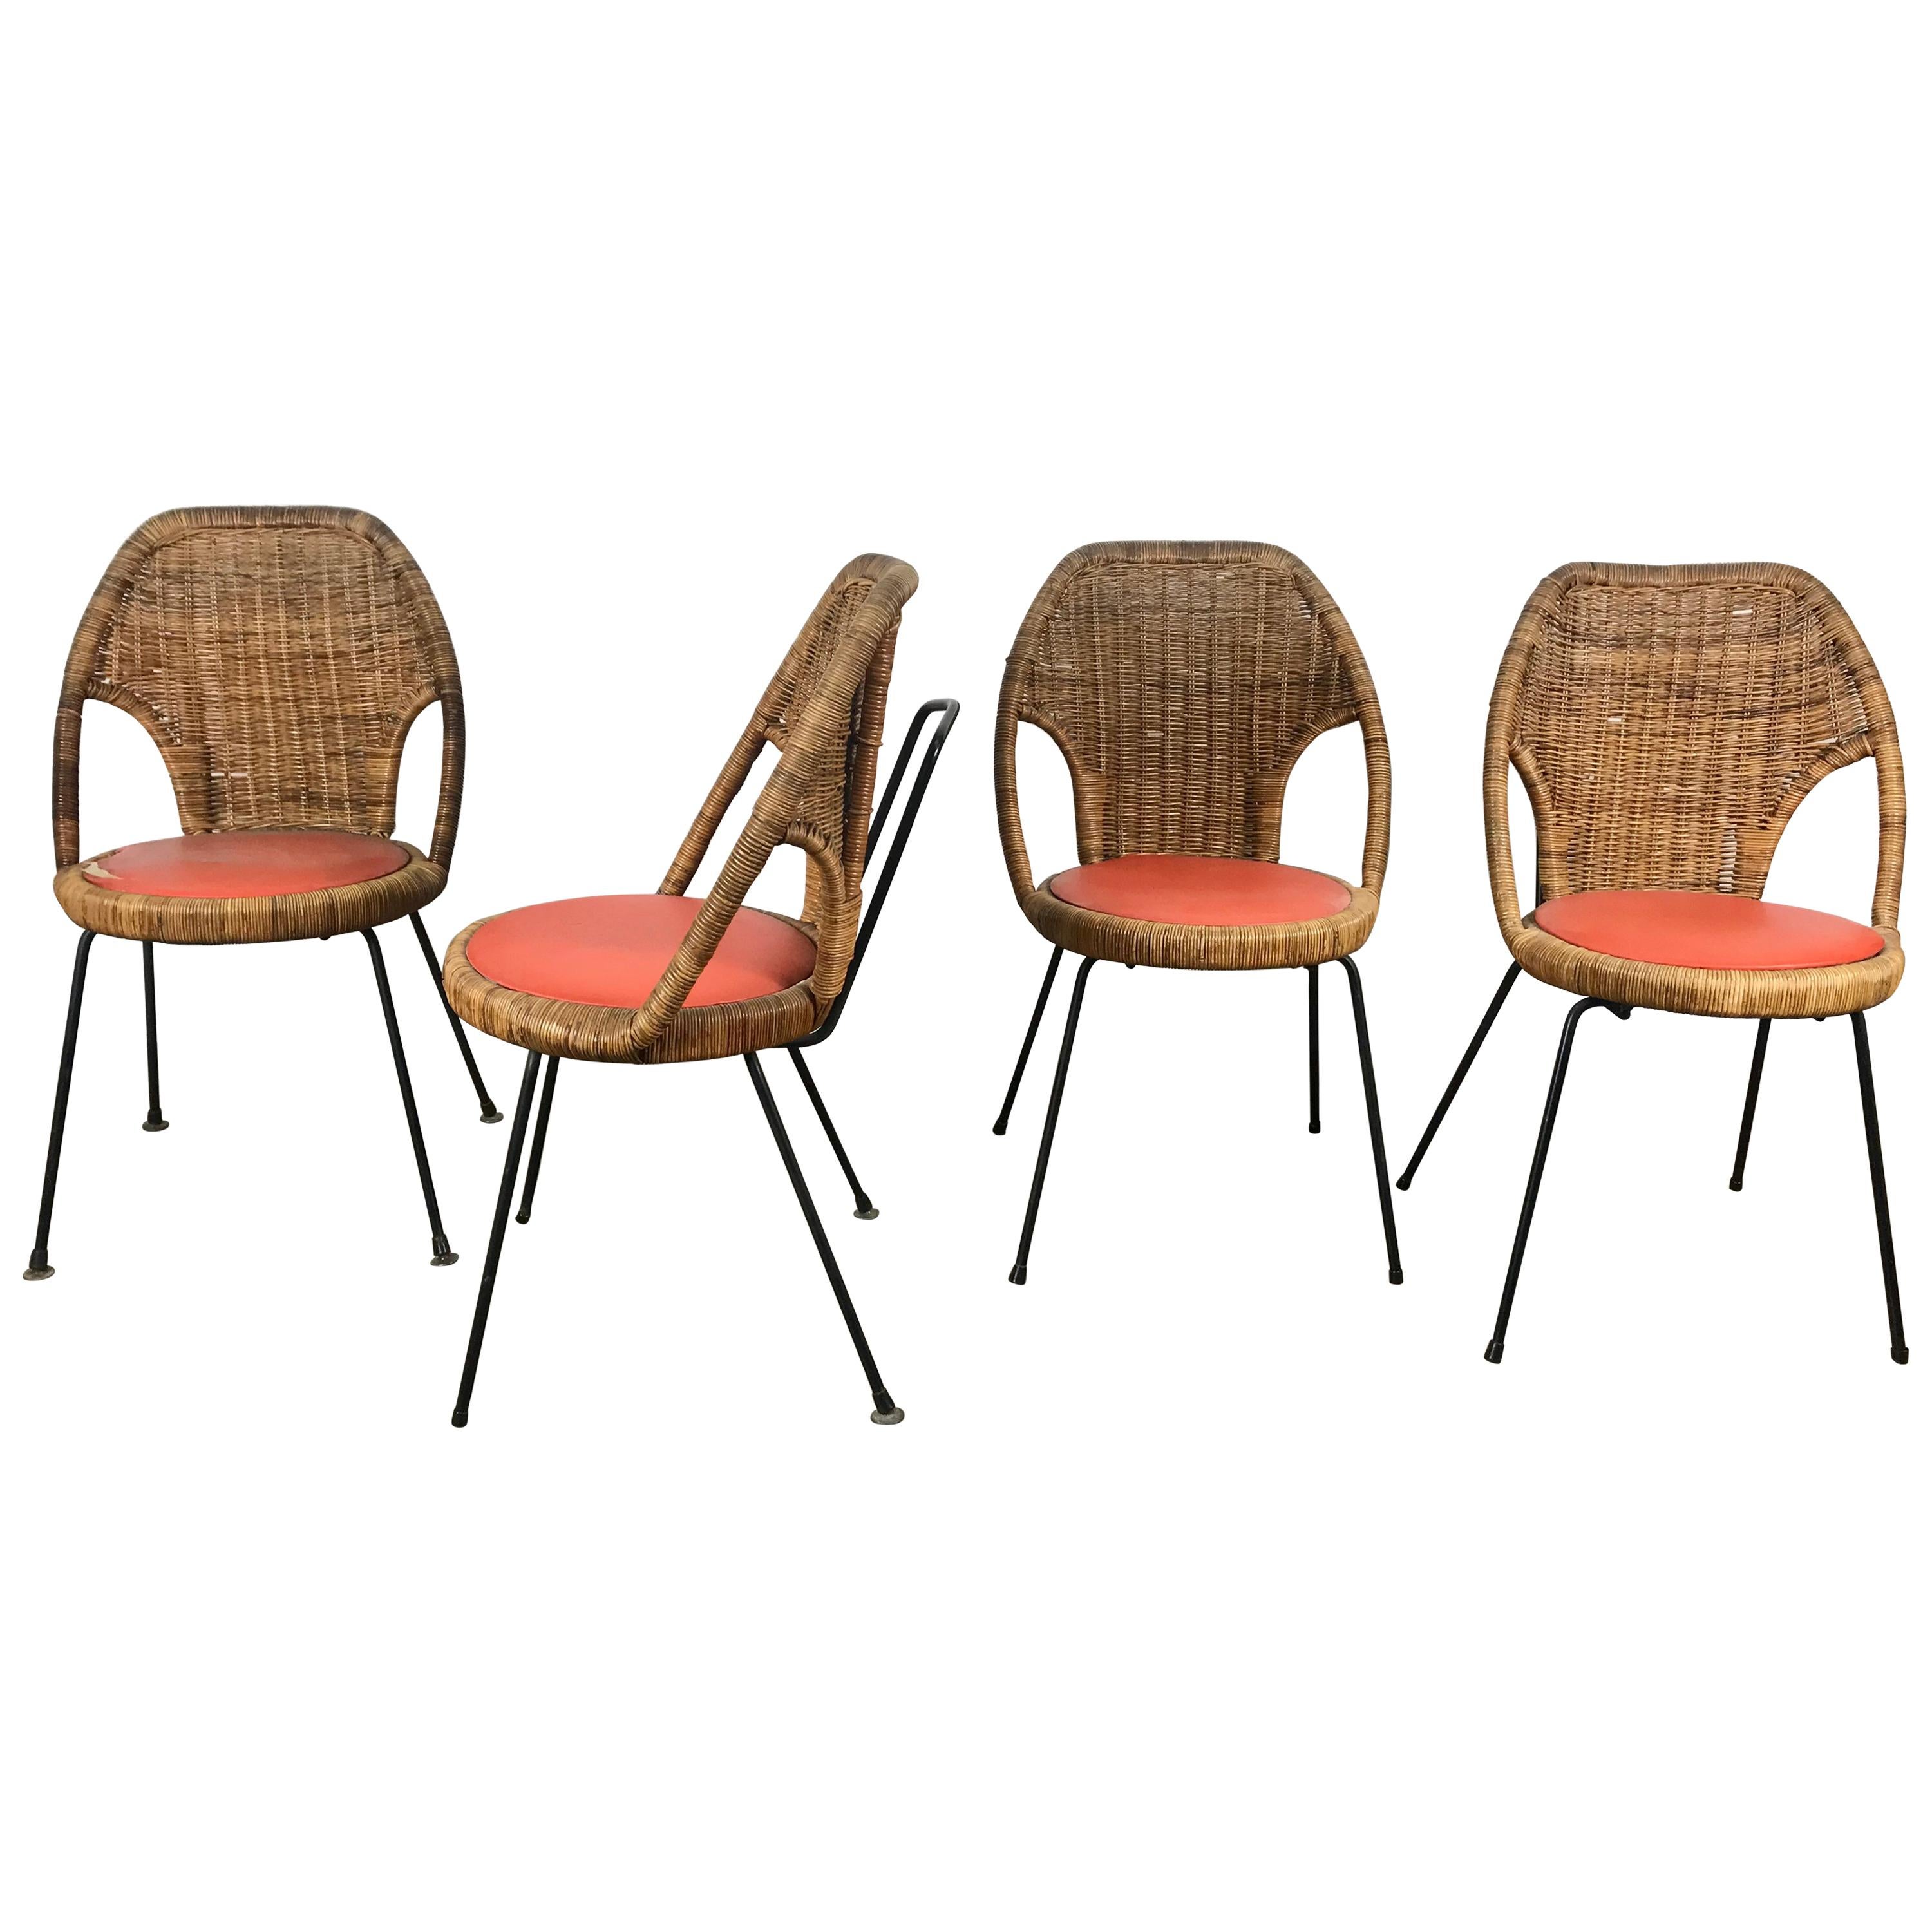 Danny Ho Fong, Wicker and Iron Dinette Chairs for Tropical